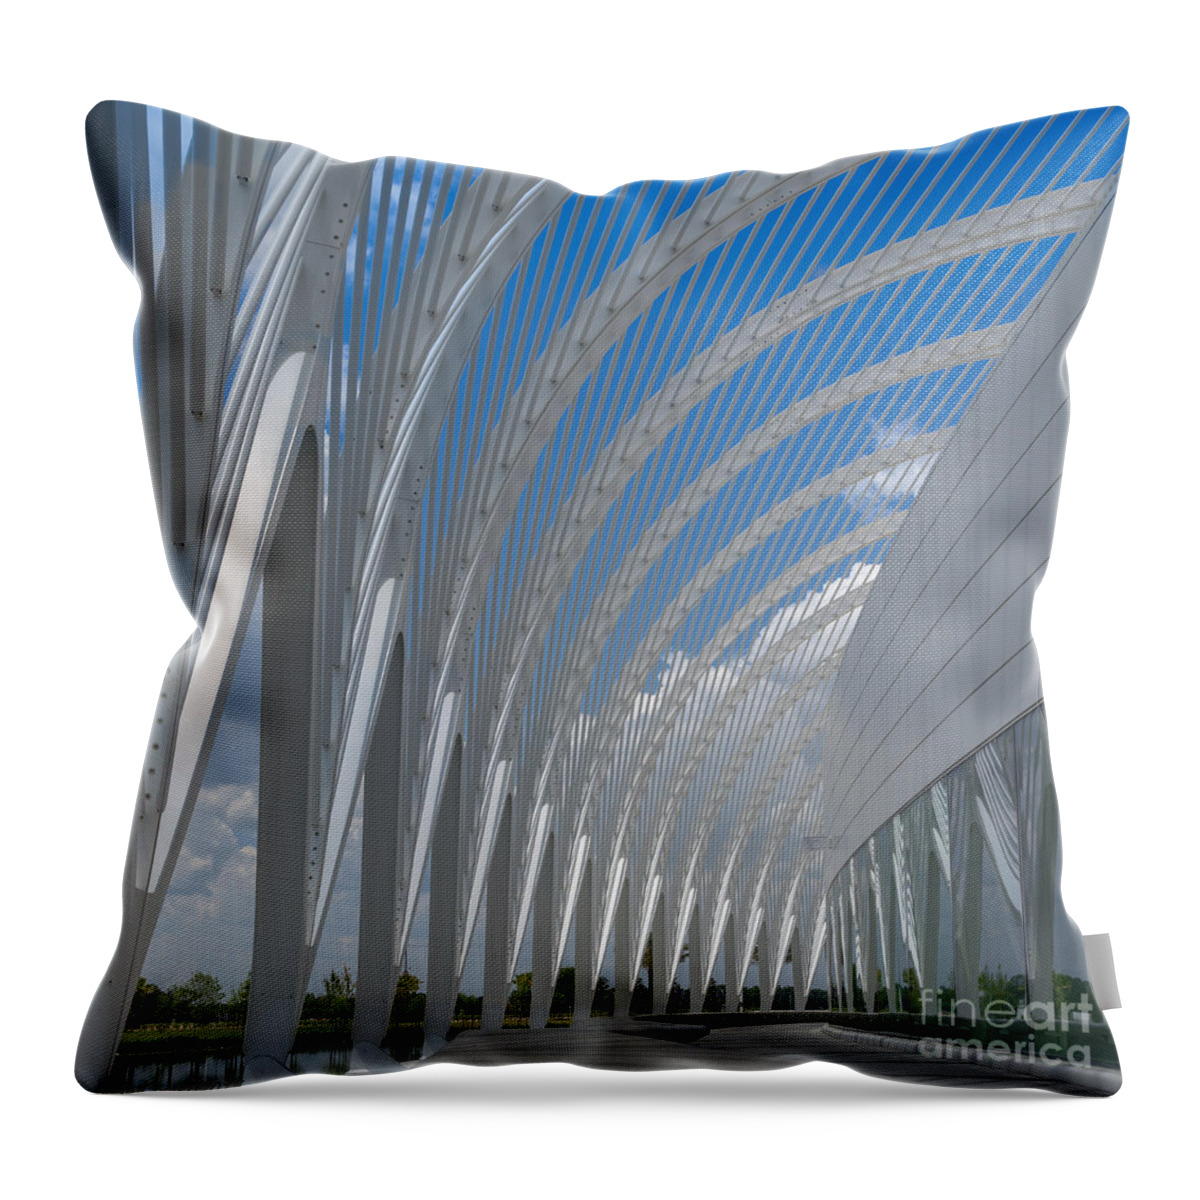 Florida Poly Tech University Throw Pillow featuring the photograph University Arching Lines by Sue Karski